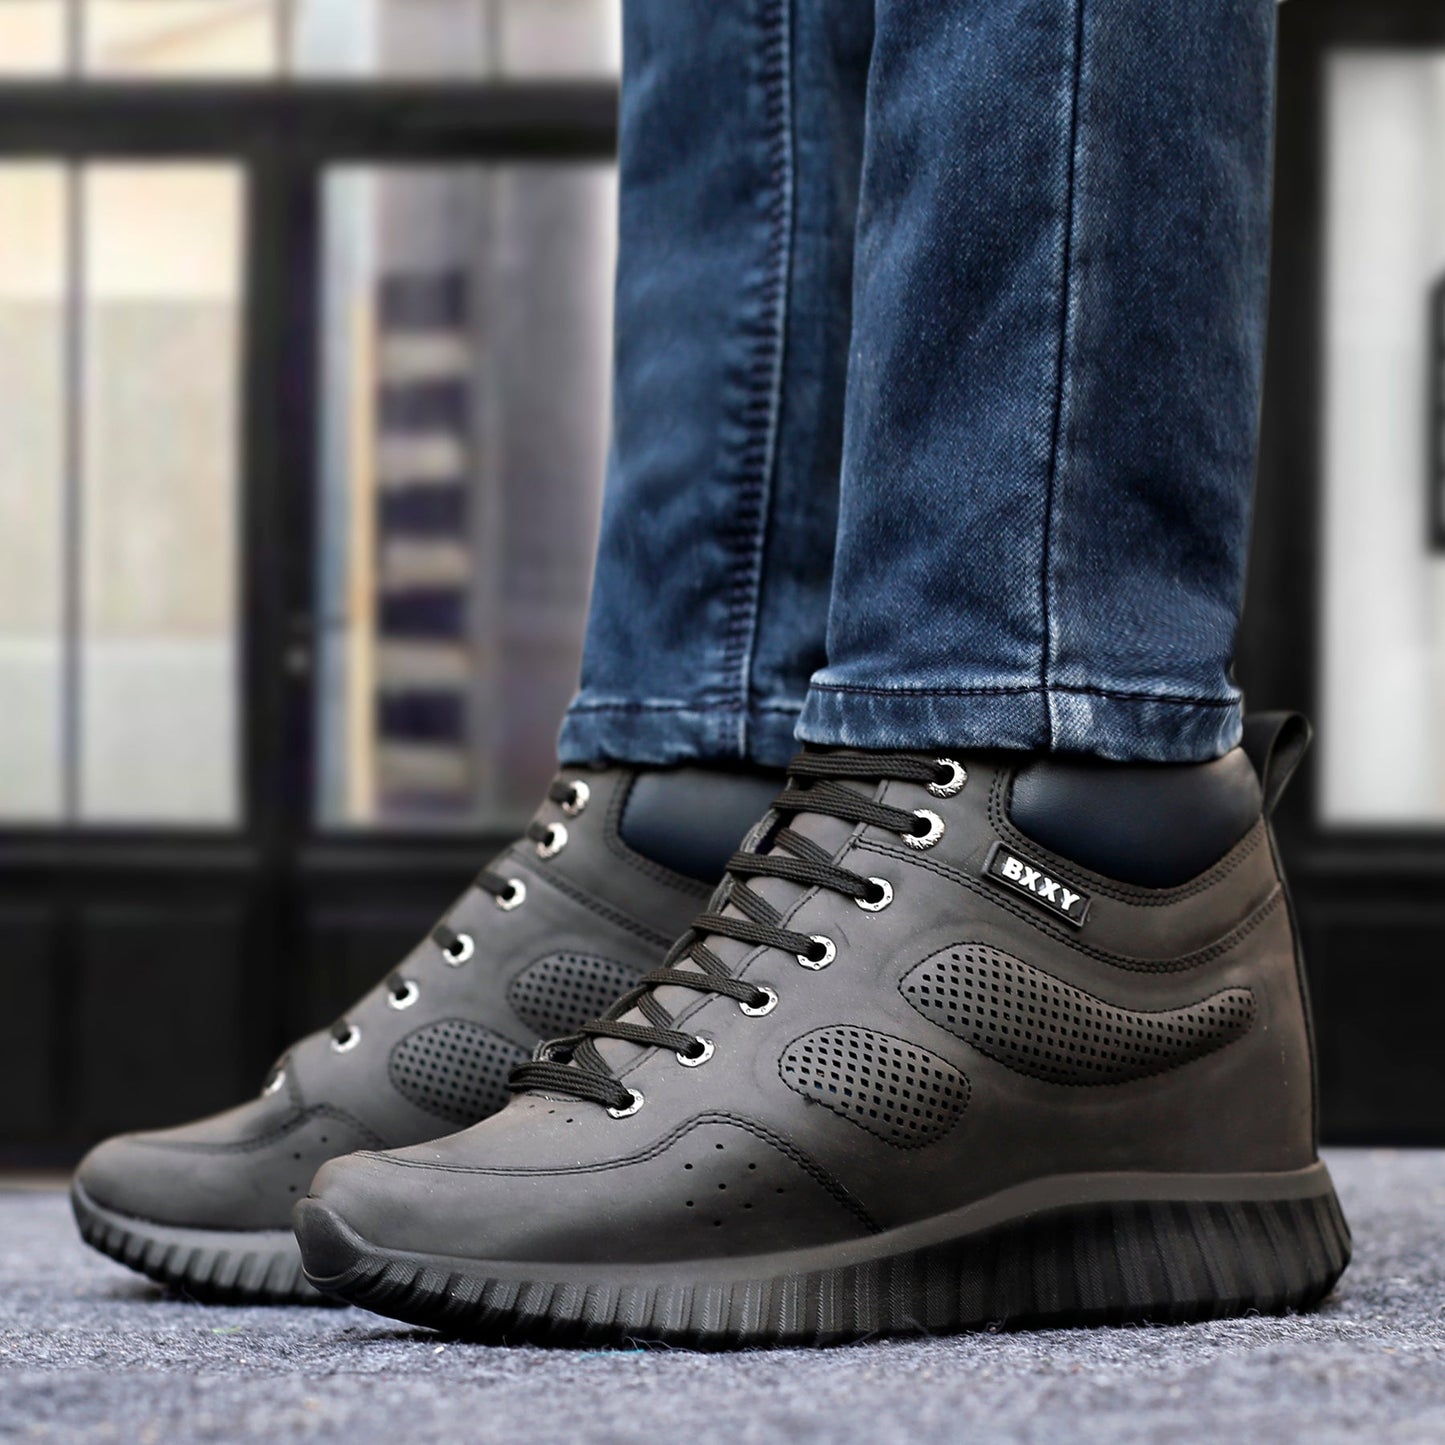 Bxxy's 3 Inch Hidden Height Increasing Elevator Lace-up Breathable Shoes for Men